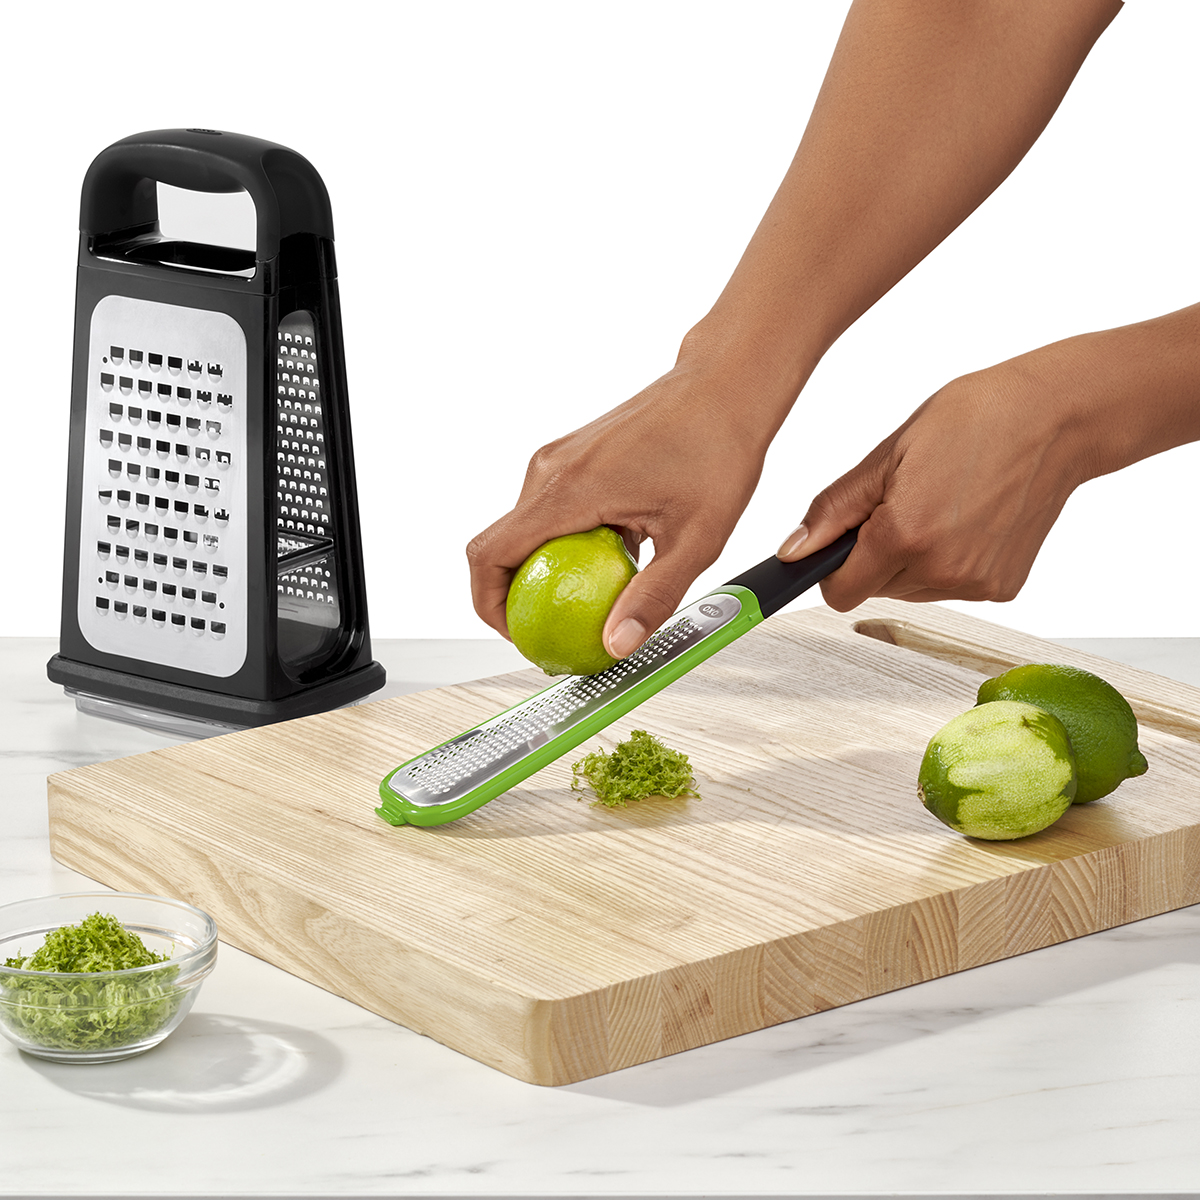 https://www.containerstore.com/catalogimages/425009/10086166-OXO-Box-Grater-VEN8.jpg